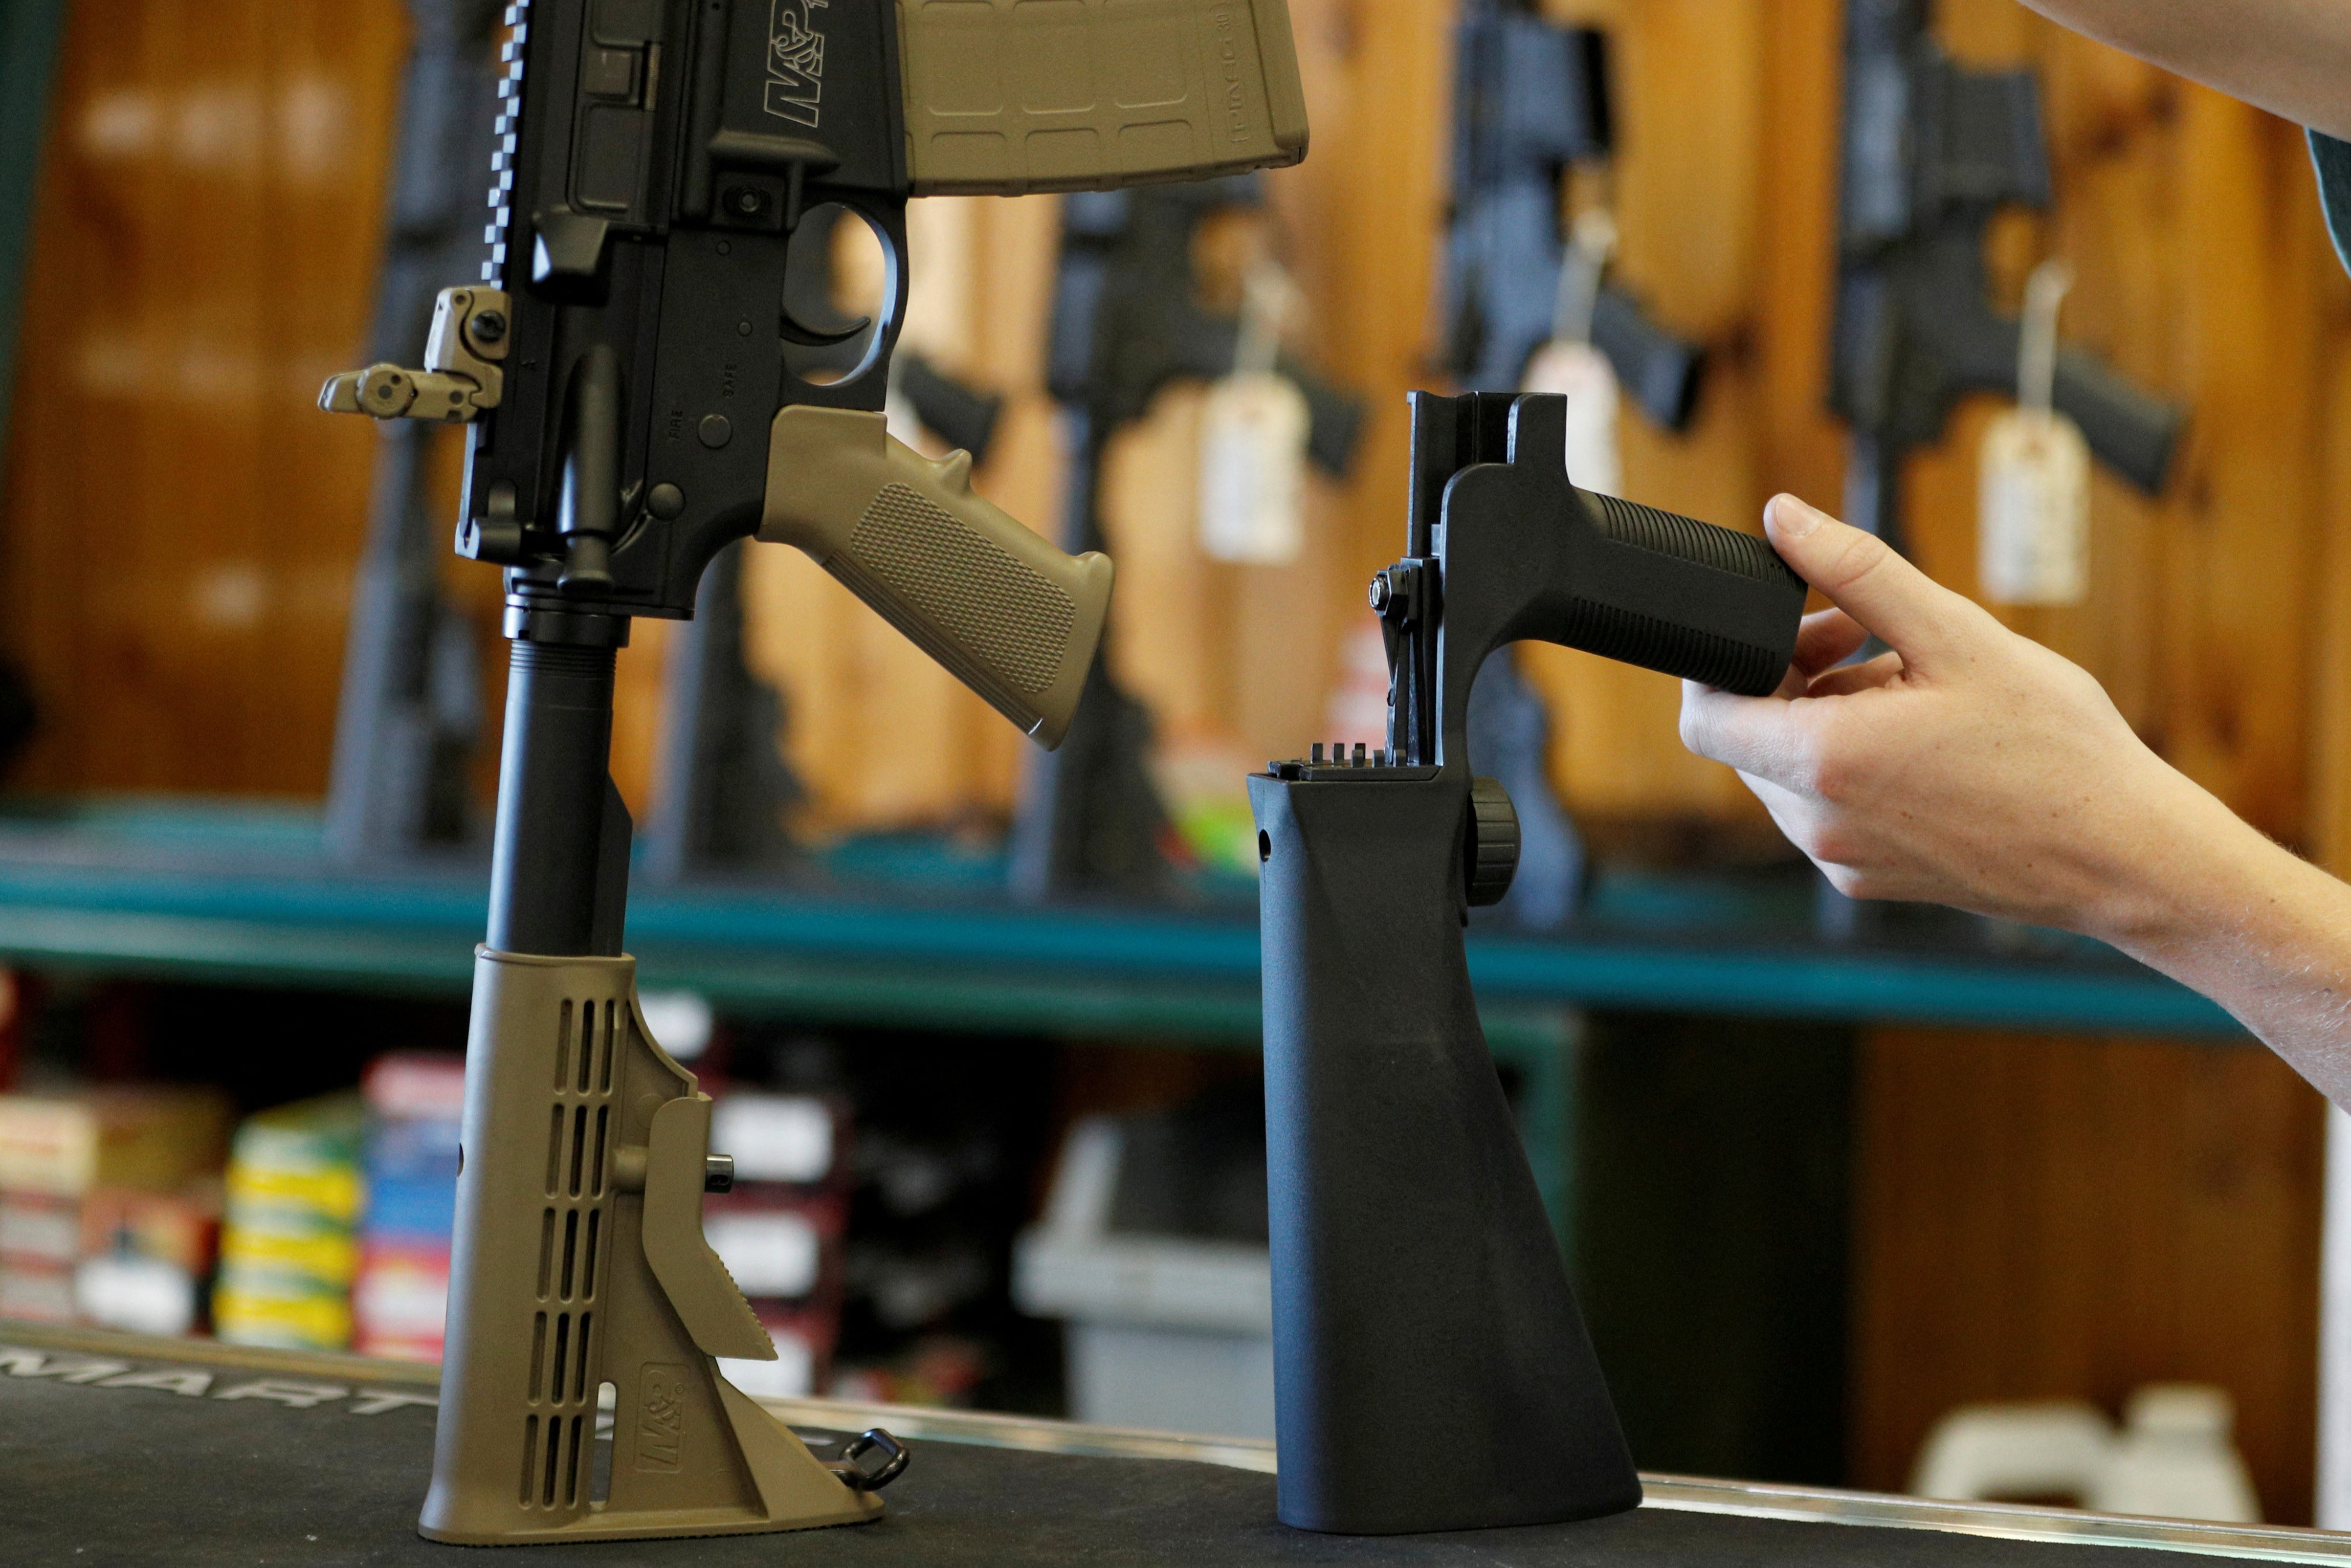 A bump fire stock that attaches to a semi-automatic rifle to increase the firing rate is seen at Good Guys Gun Shop on October 4, 2017